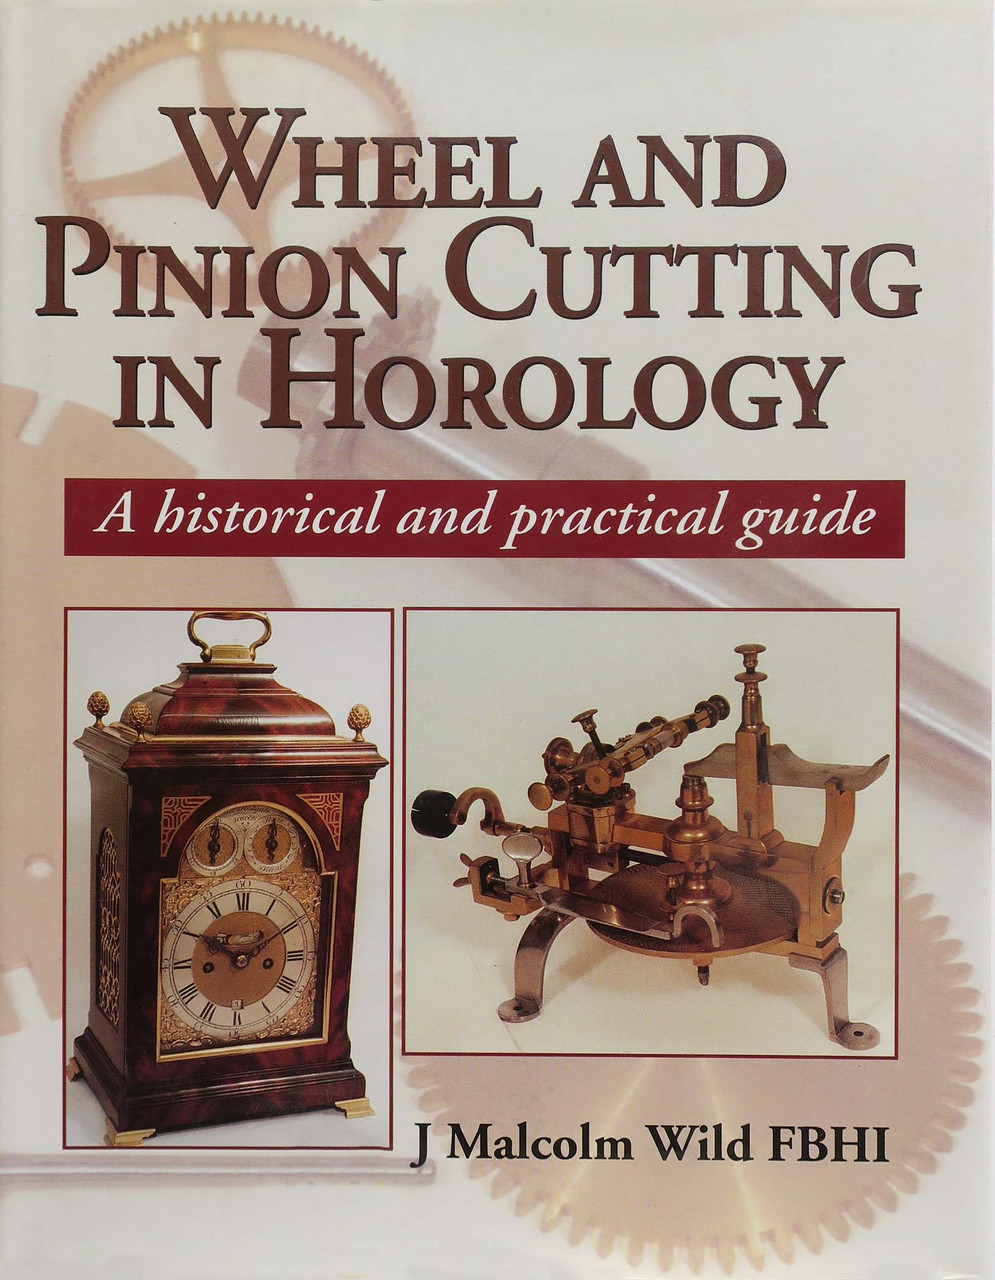 WHEEL AND PINION CUTTING IN HOROLOGY BOOK